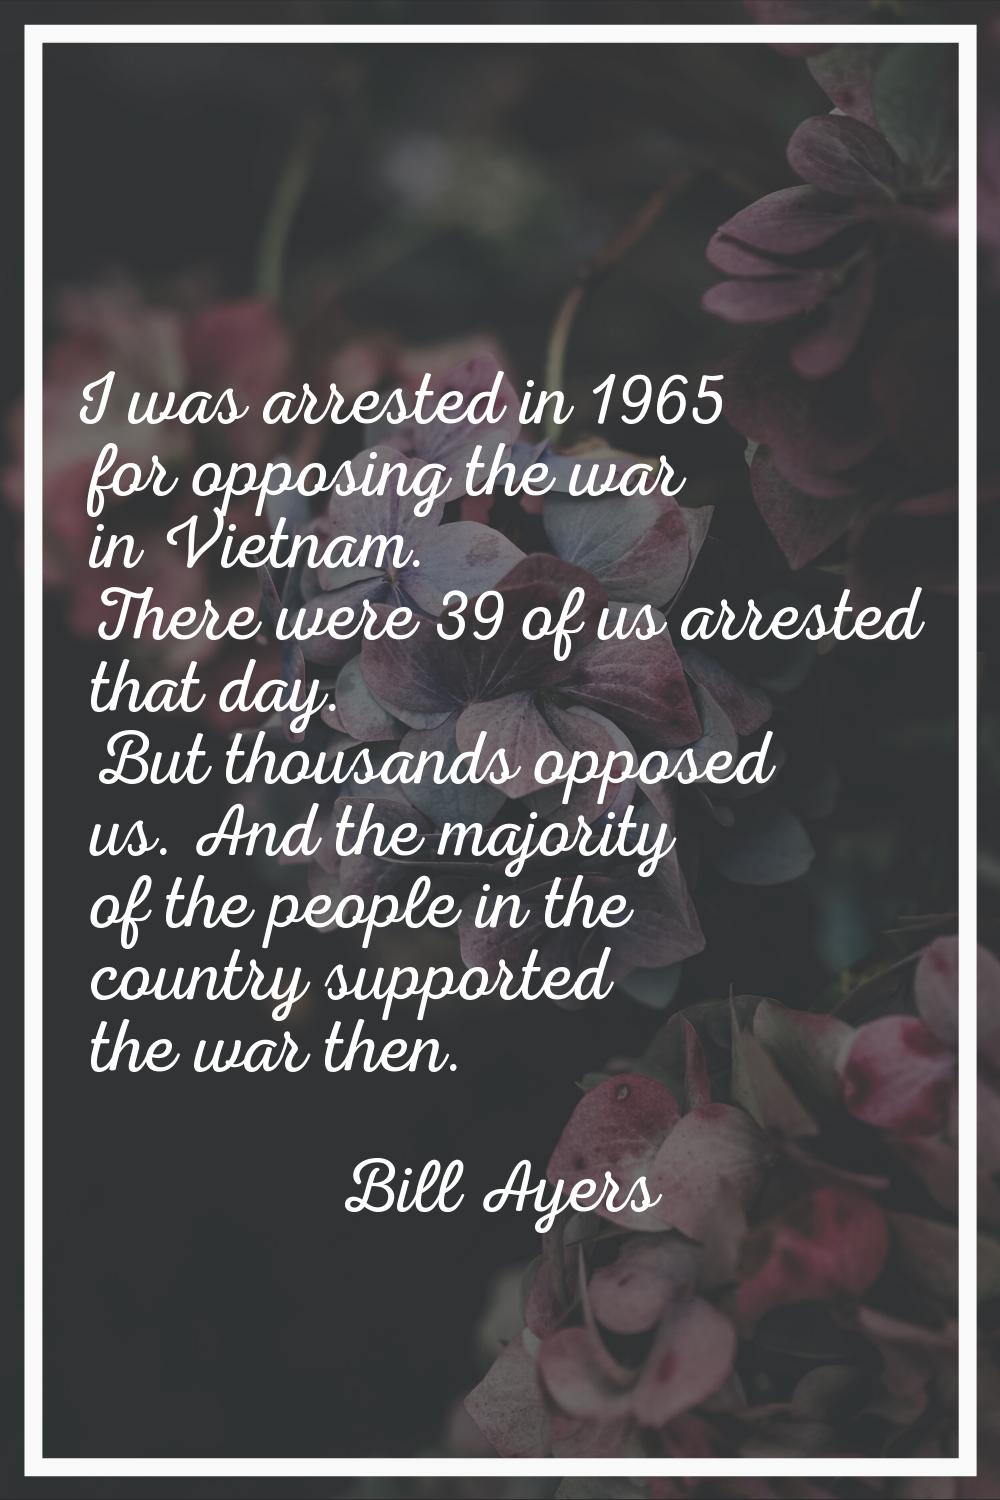 I was arrested in 1965 for opposing the war in Vietnam. There were 39 of us arrested that day. But 